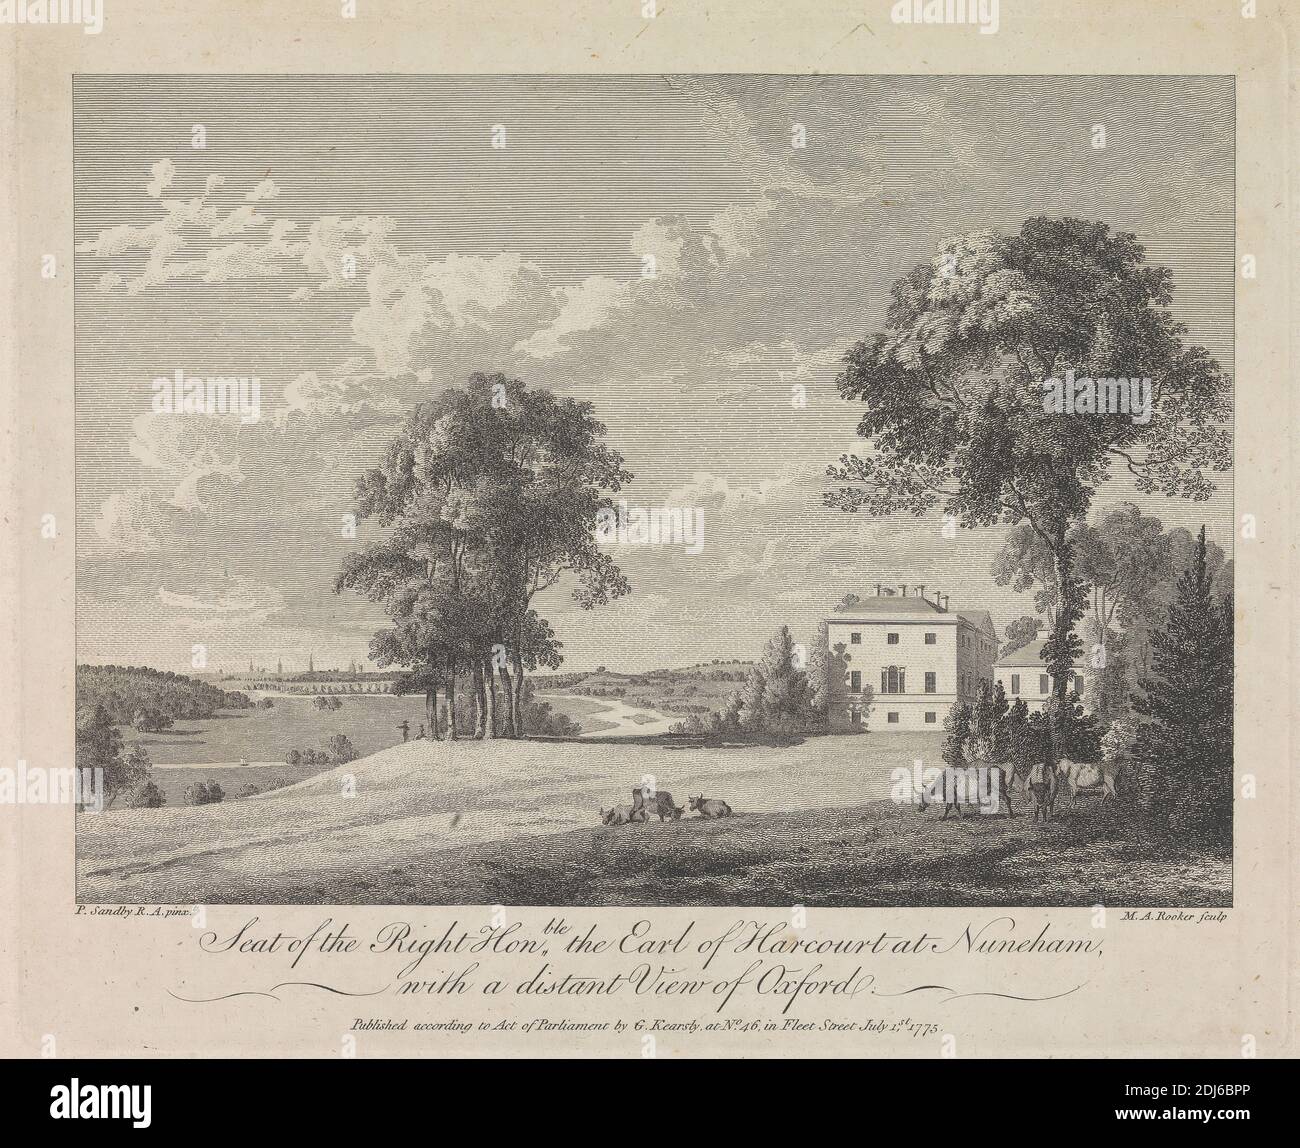 Seat of the Right Honorable, the Earl of Harcourt at Nuneham, with a distant View of Oxford, Print made by Michael 'Angelo' Rooker, 1746–1801, British, after Paul Sandby RA, 1731–1809, British, 1775, Line engraving on medium, moderately textured, cream laid paper, Sheet: 7 5/16 × 9 3/4 inches (18.6 × 24.8 cm), Plate: 6 7/16 × 7 15/16 inches (16.4 × 20.2 cm), and Image: 5 3/16 × 7 1/4 inches (13.1 × 18.4 cm), architectural subject, country house, cows, estate, landscape, river, England, Isis, Nuneham Courtenay, Oxford, Oxfordshire, United Kingdom Stock Photo